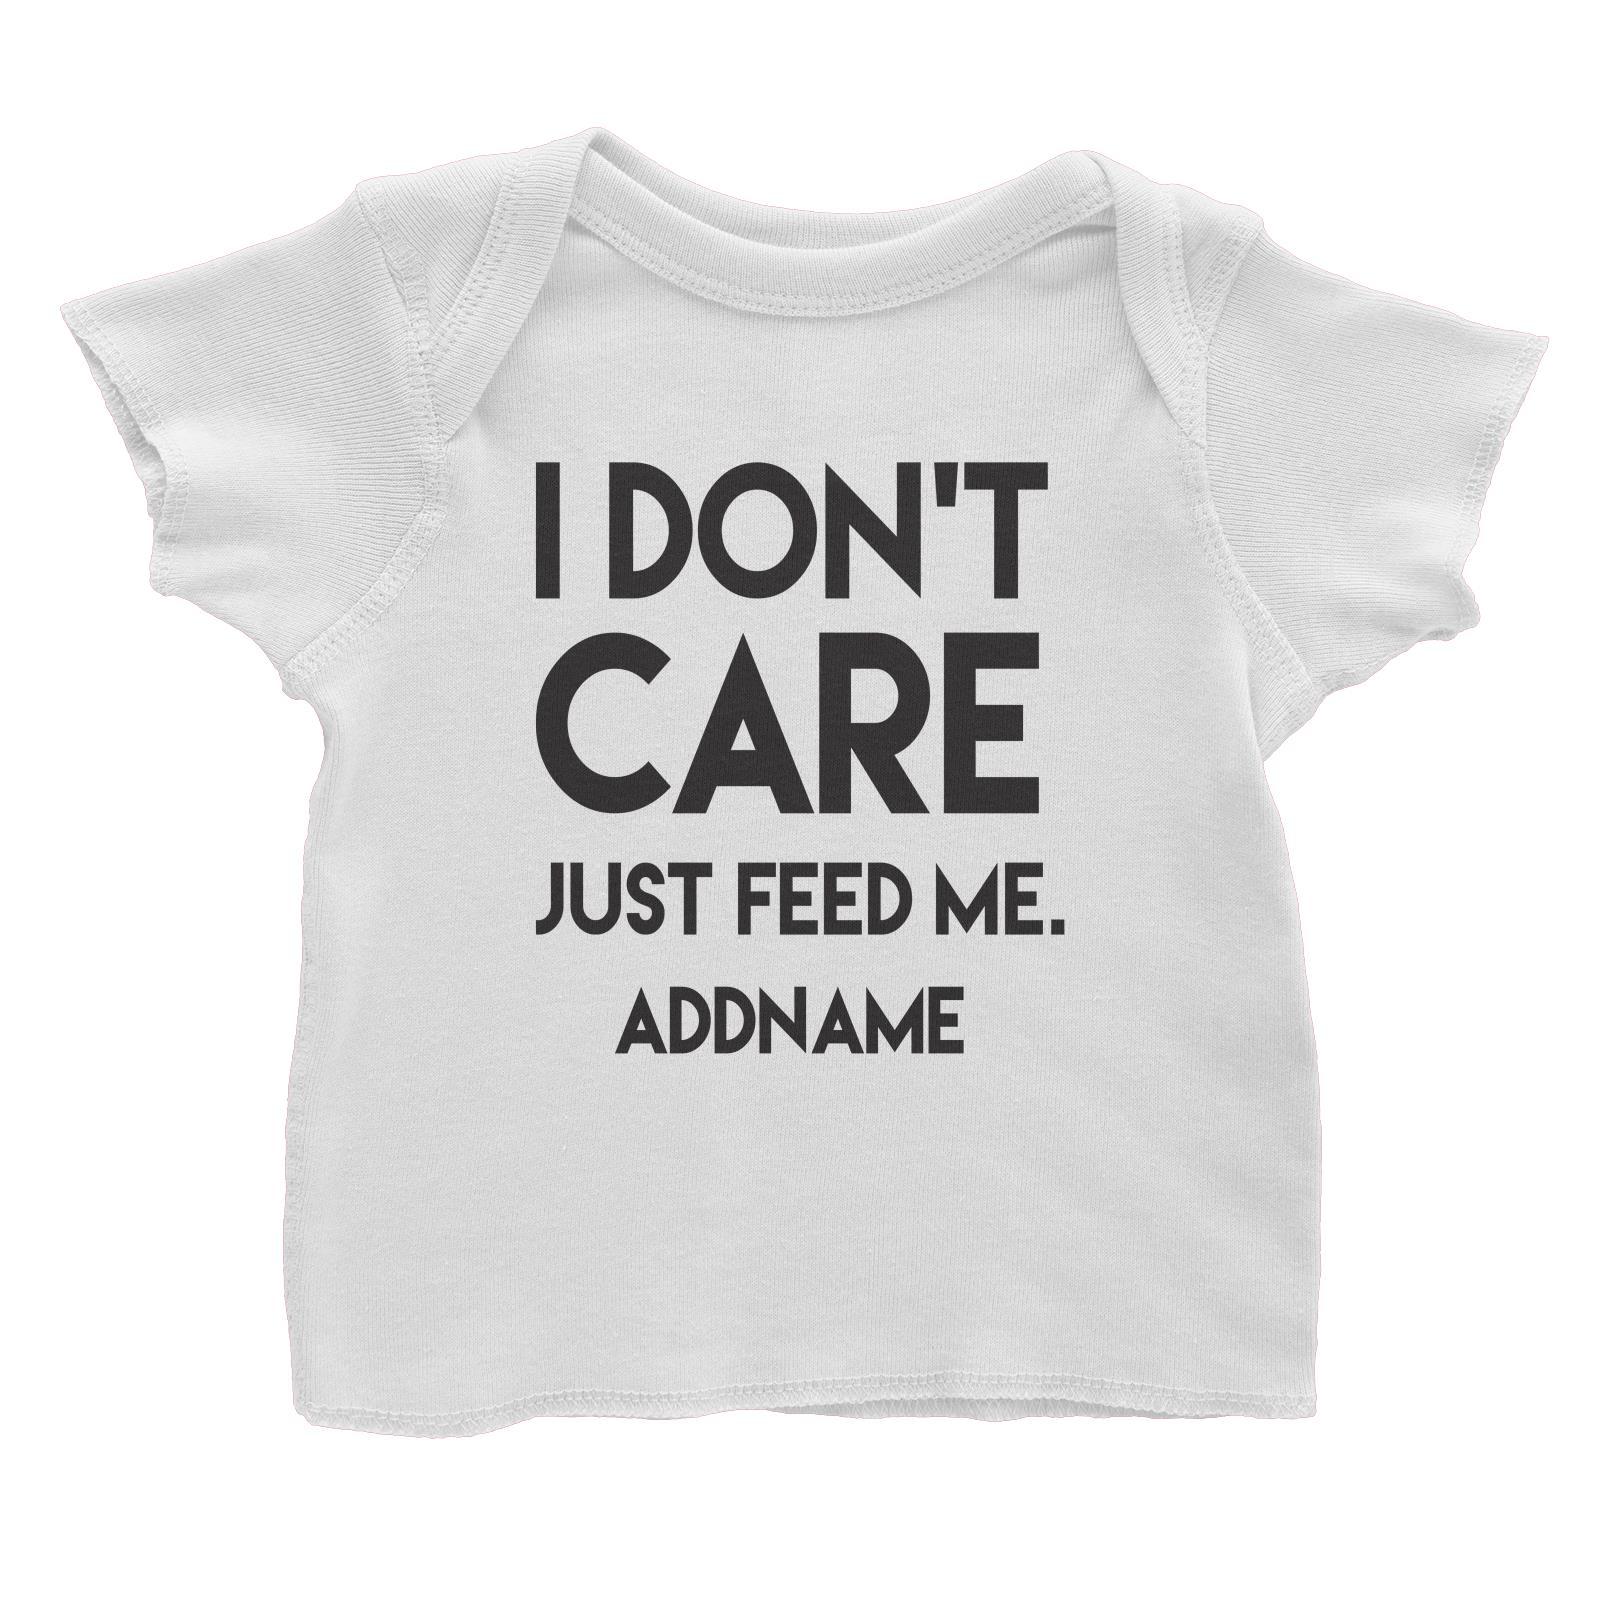 I Don't Care Who's Right Just Feed Me Addname Baby T-Shirt  Funny Matching Family Personalizable Designs